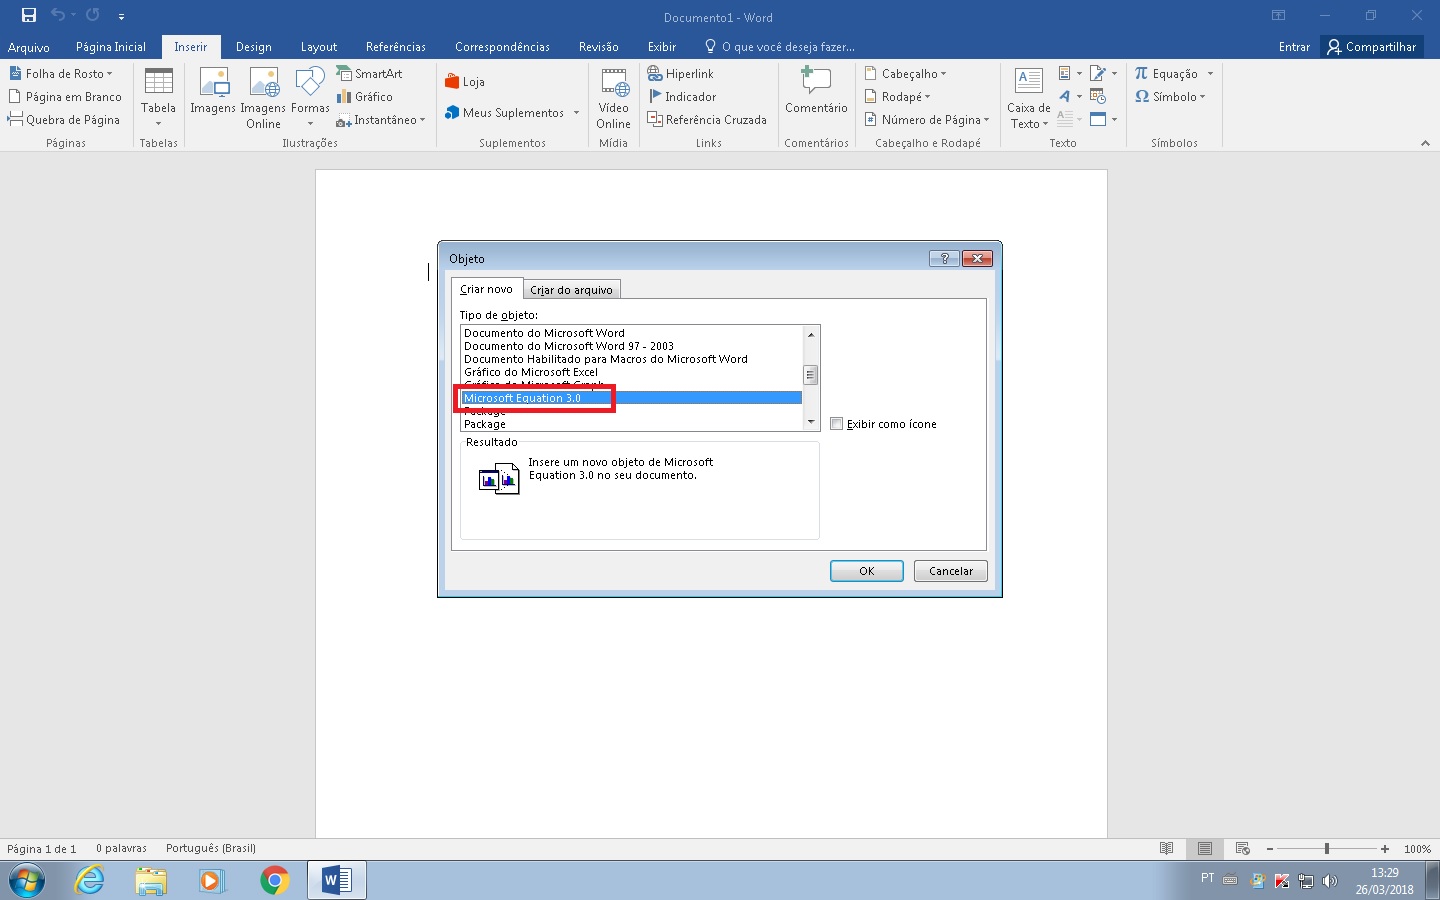 install microsoft equation 3.0 for word 2003